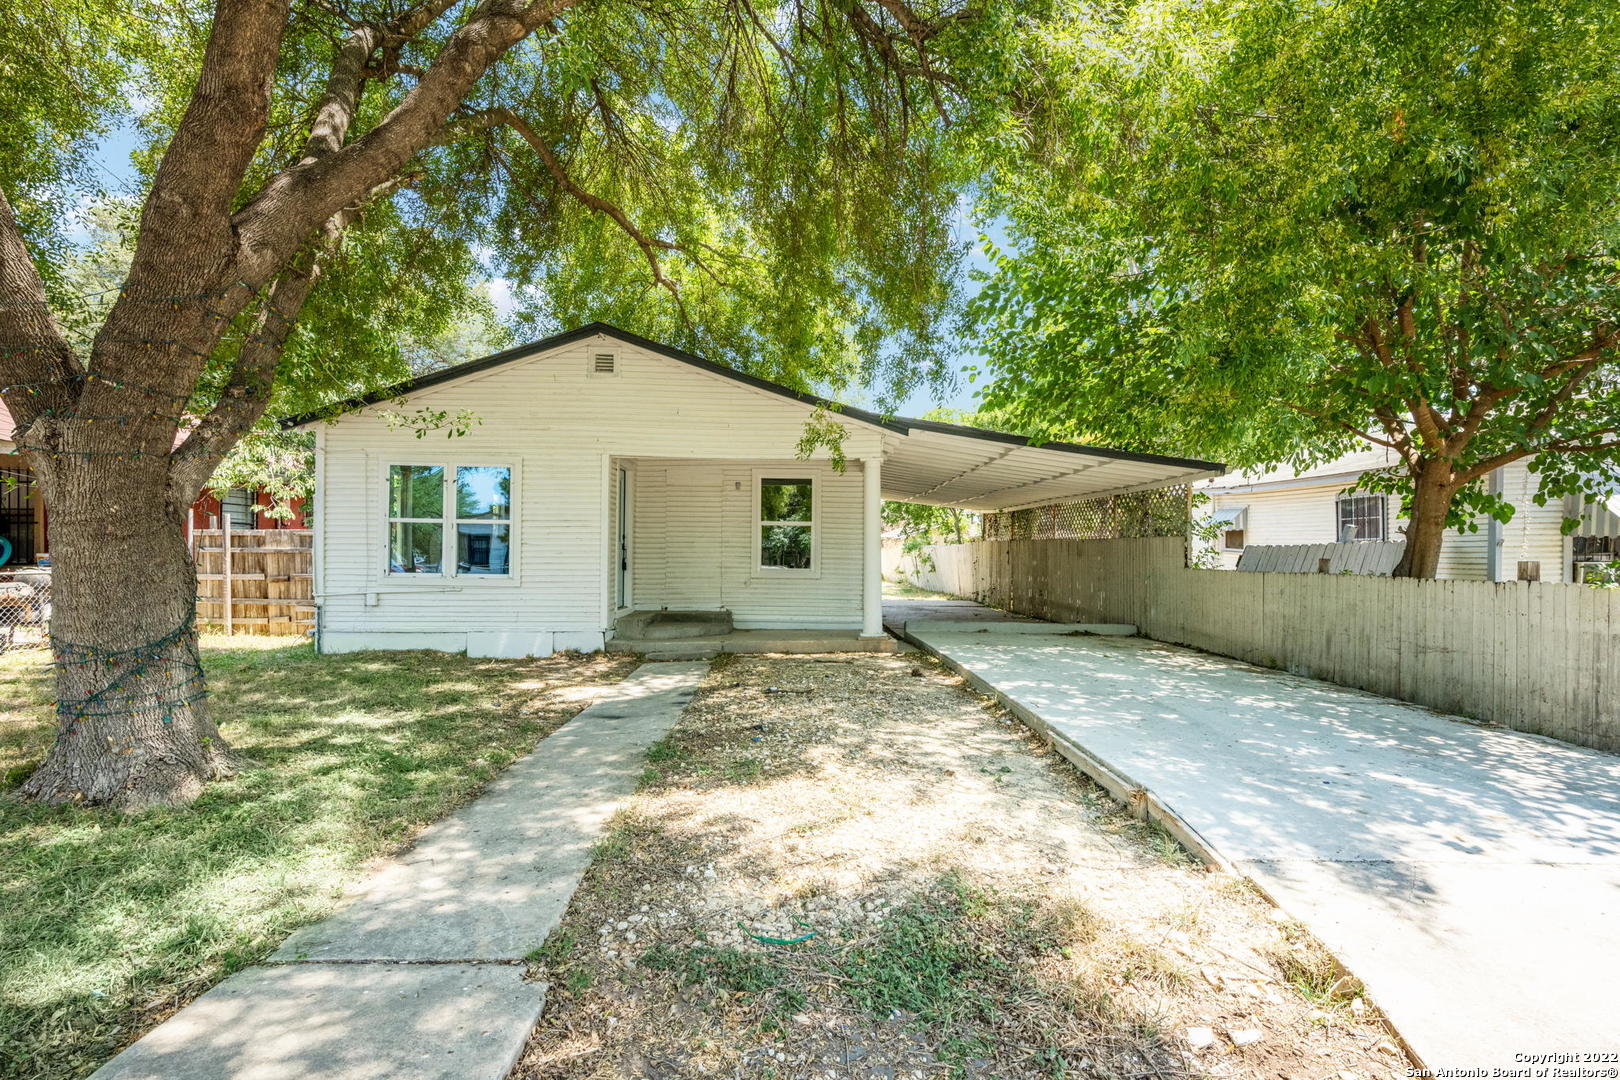 Recently remodeled cute starter home. 3 bedrooms and 1 bath. Fresh exterior paint and interior, updated restroom. Property has mature tree in front, with  large back yard for family. This property features a back of property shed, homeowners can choose to finish out.